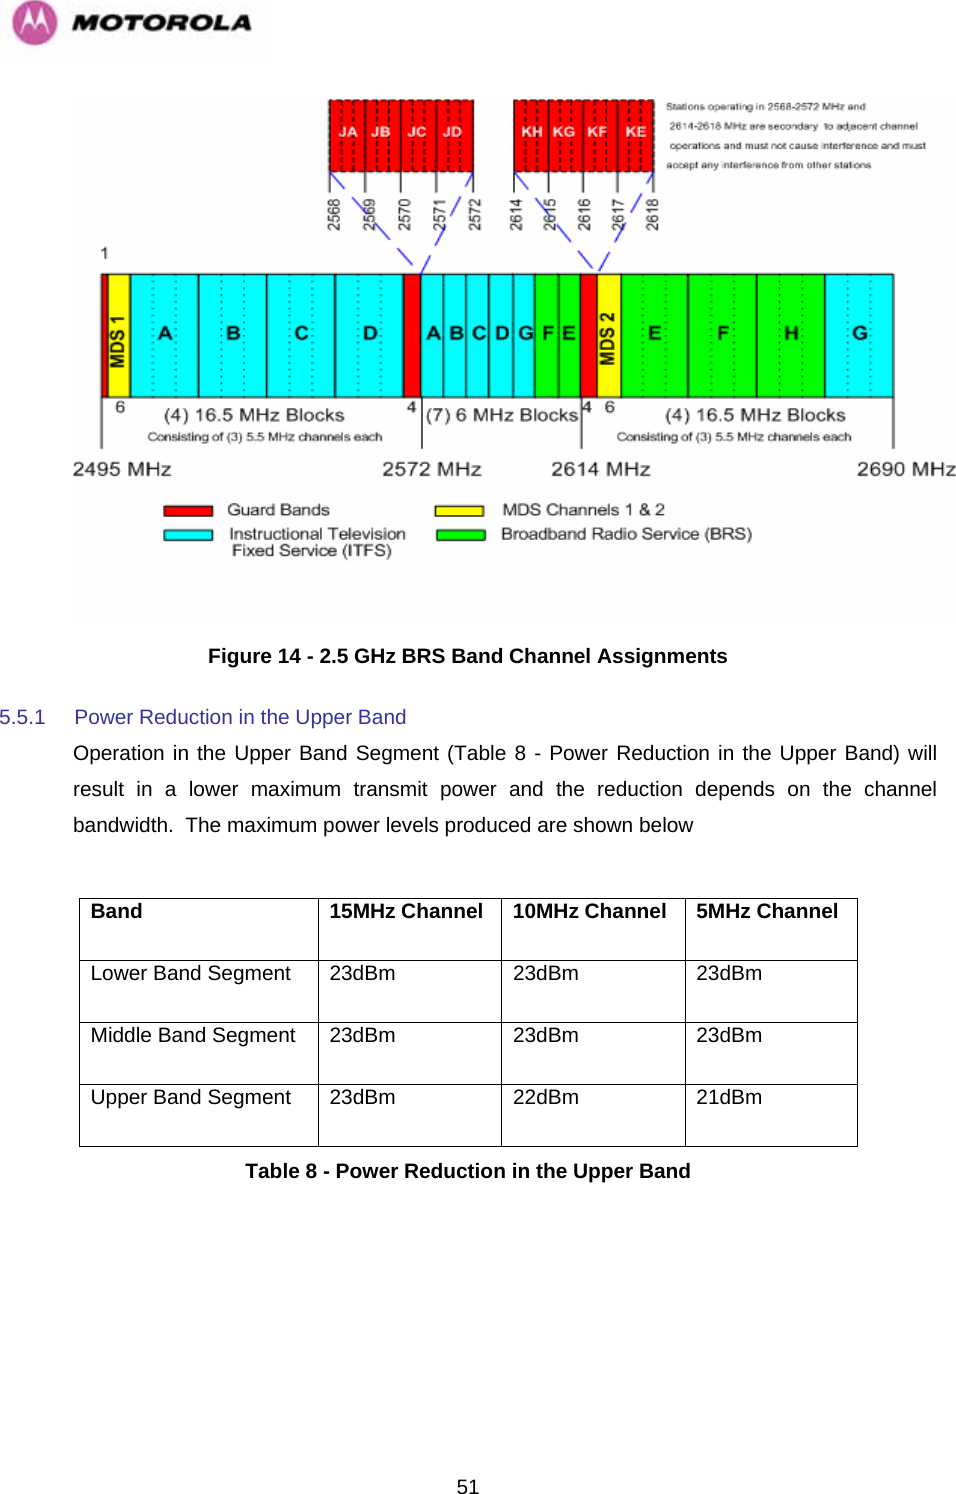   51 Figure 14 - 2.5 GHz BRS Band Channel Assignments 5.5.1  Power Reduction in the Upper Band Operation in the Upper Band Segment (Table 8 - Power Reduction in the Upper Band) will result in a lower maximum transmit power and the reduction depends on the channel bandwidth.  The maximum power levels produced are shown below  Band  15MHz Channel  10MHz Channel  5MHz Channel Lower Band Segment  23dBm  23dBm  23dBm Middle Band Segment  23dBm  23dBm  23dBm Upper Band Segment  23dBm  22dBm  21dBm Table 8 - Power Reduction in the Upper Band 